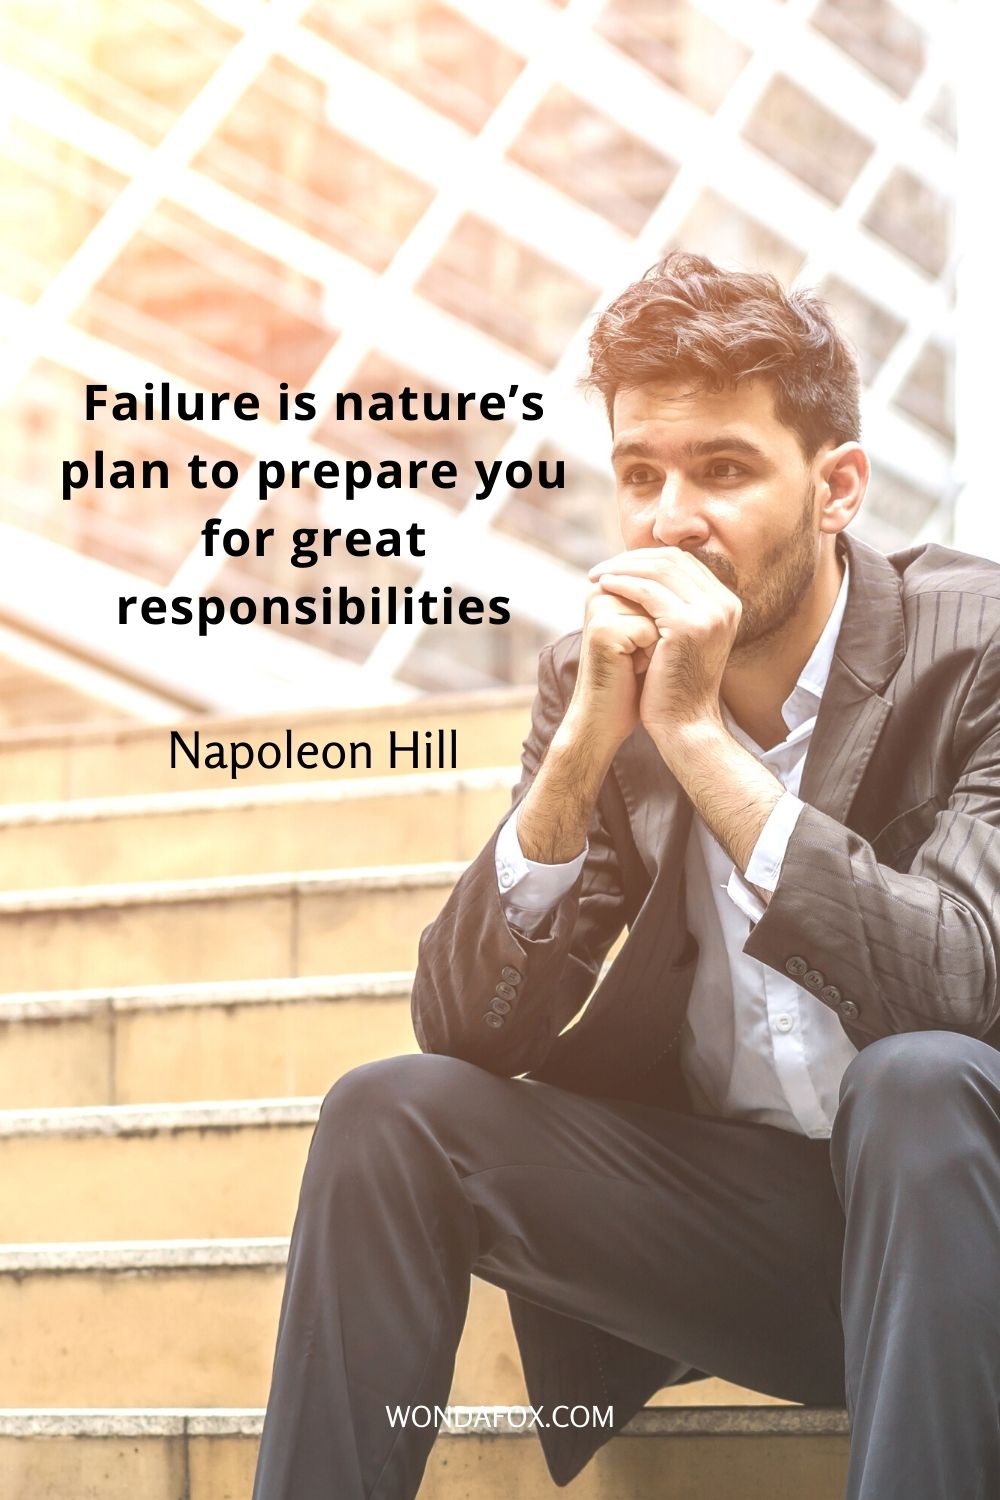 Failure is nature’s plan to prepare you for great responsibilities.